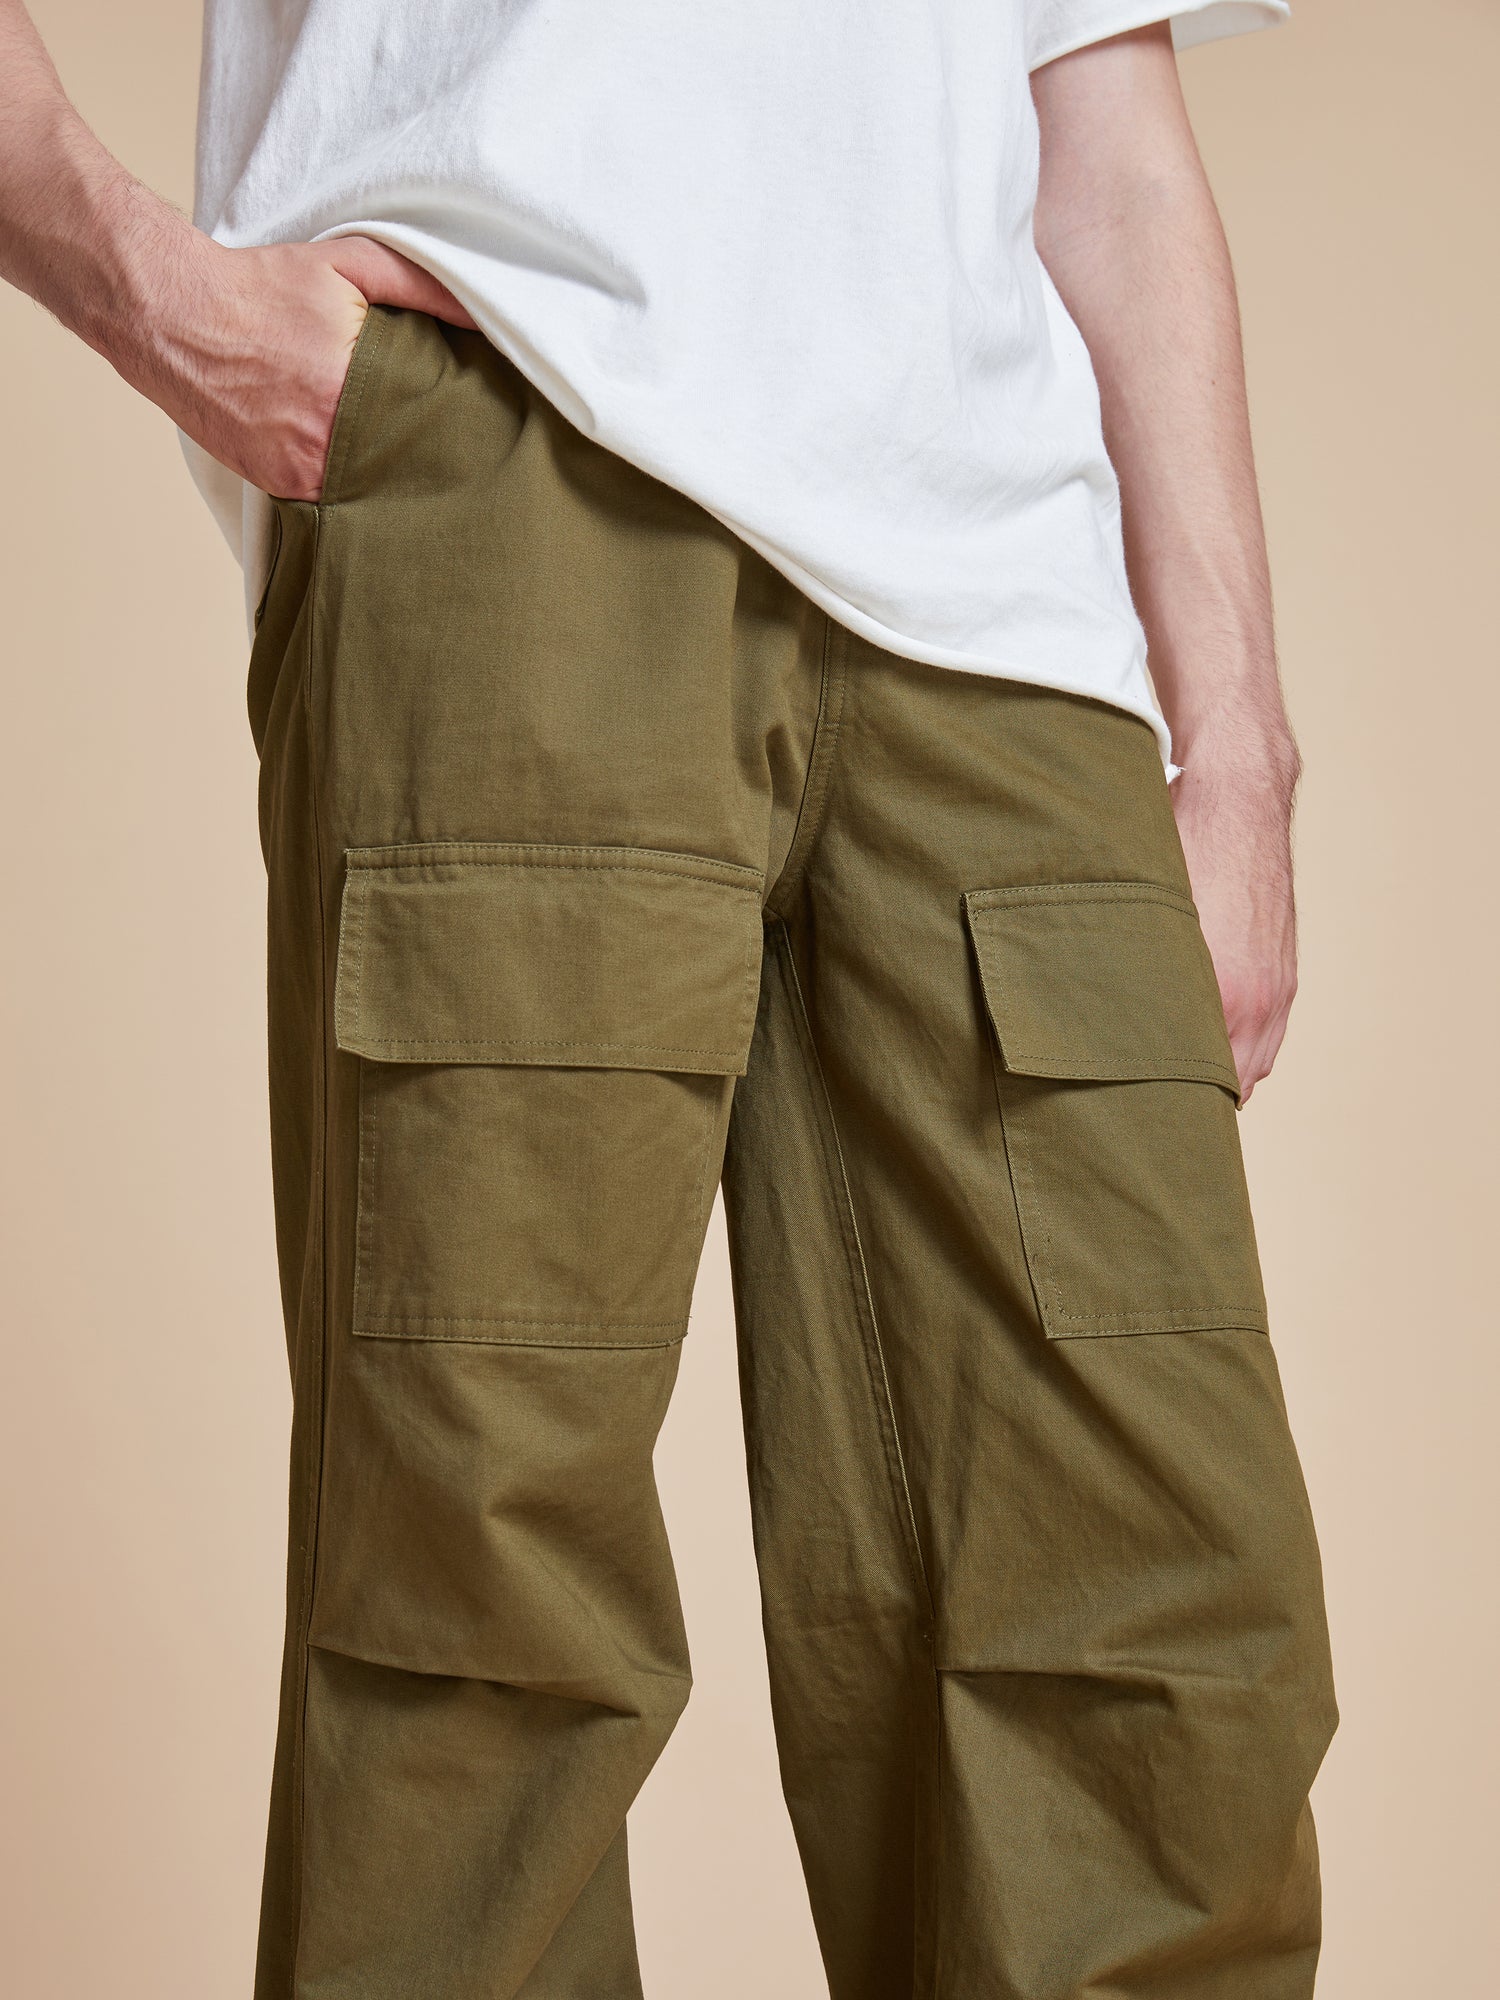 A man wearing Found Parachute Cargo Twill Pants and a white t - shirt.